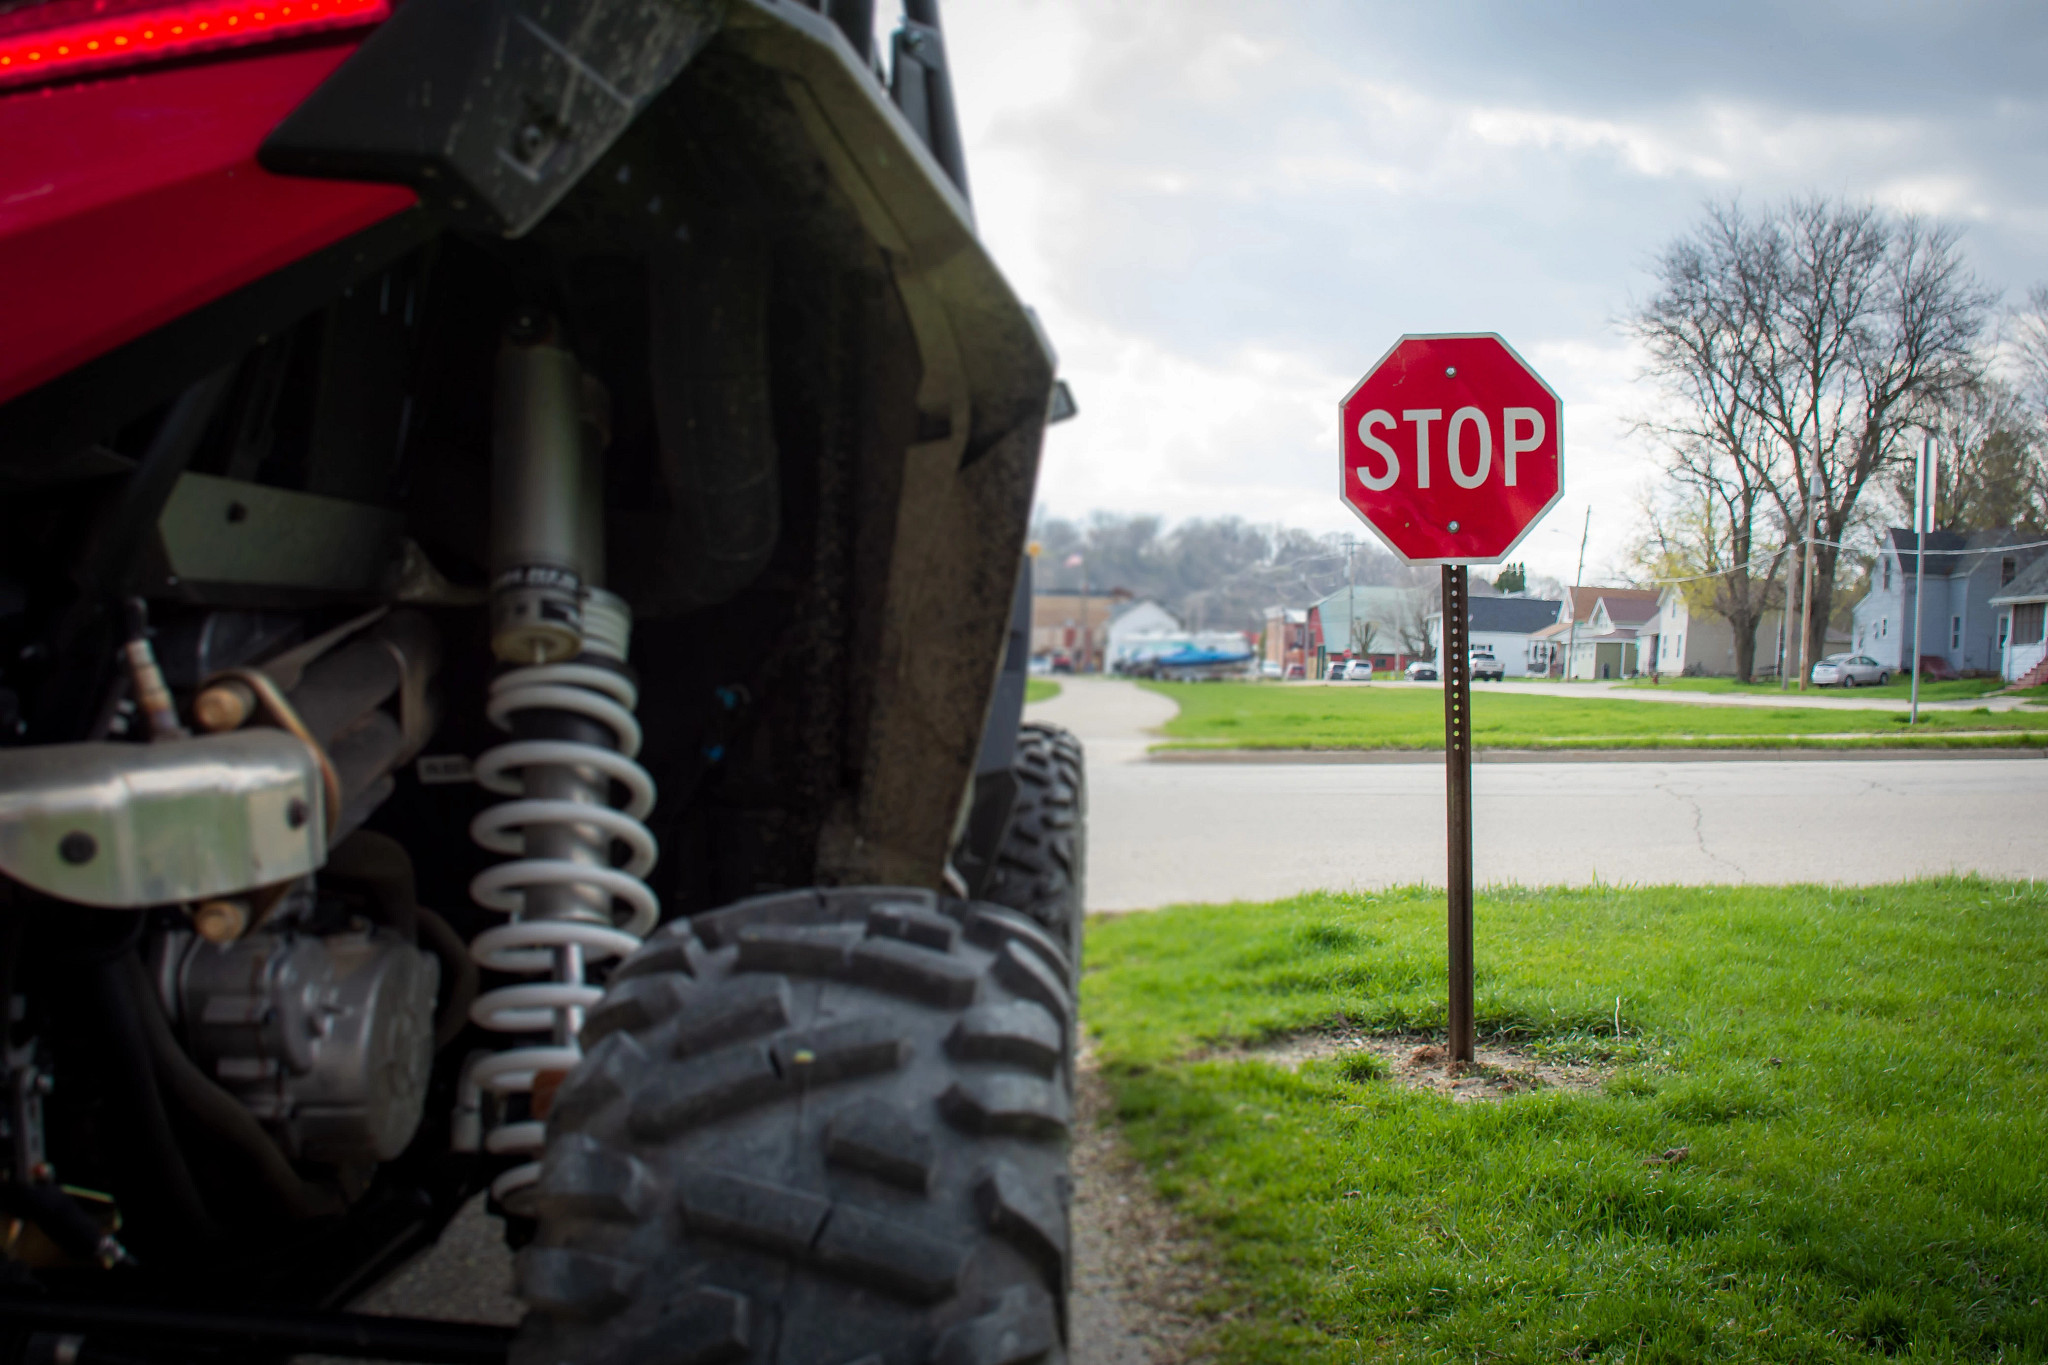 close-up of wheel of red atv stopped at stop sign on a public road